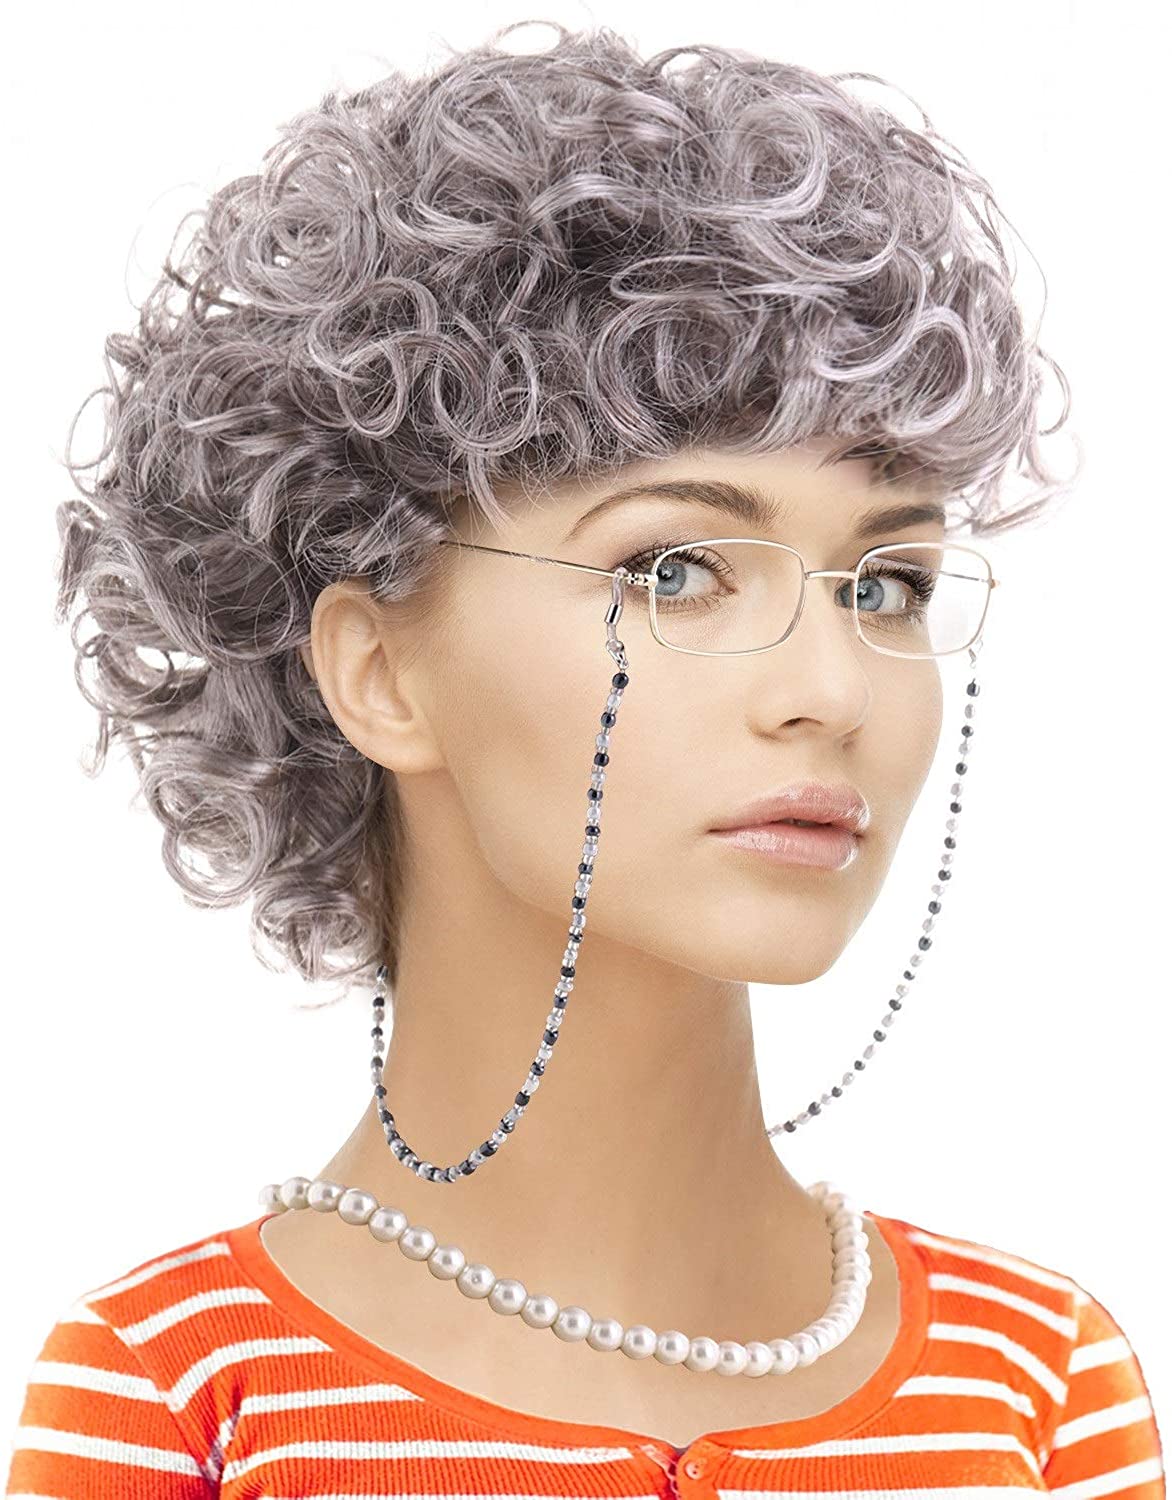 Price:$12.99    Old Lady Costume Set-Grandmother Wig,Wig Caps,Madea Granny Glasses, Eyeglass Retainer Chain,Pearl Necklace(5 Pieces) Fits All  Clothing